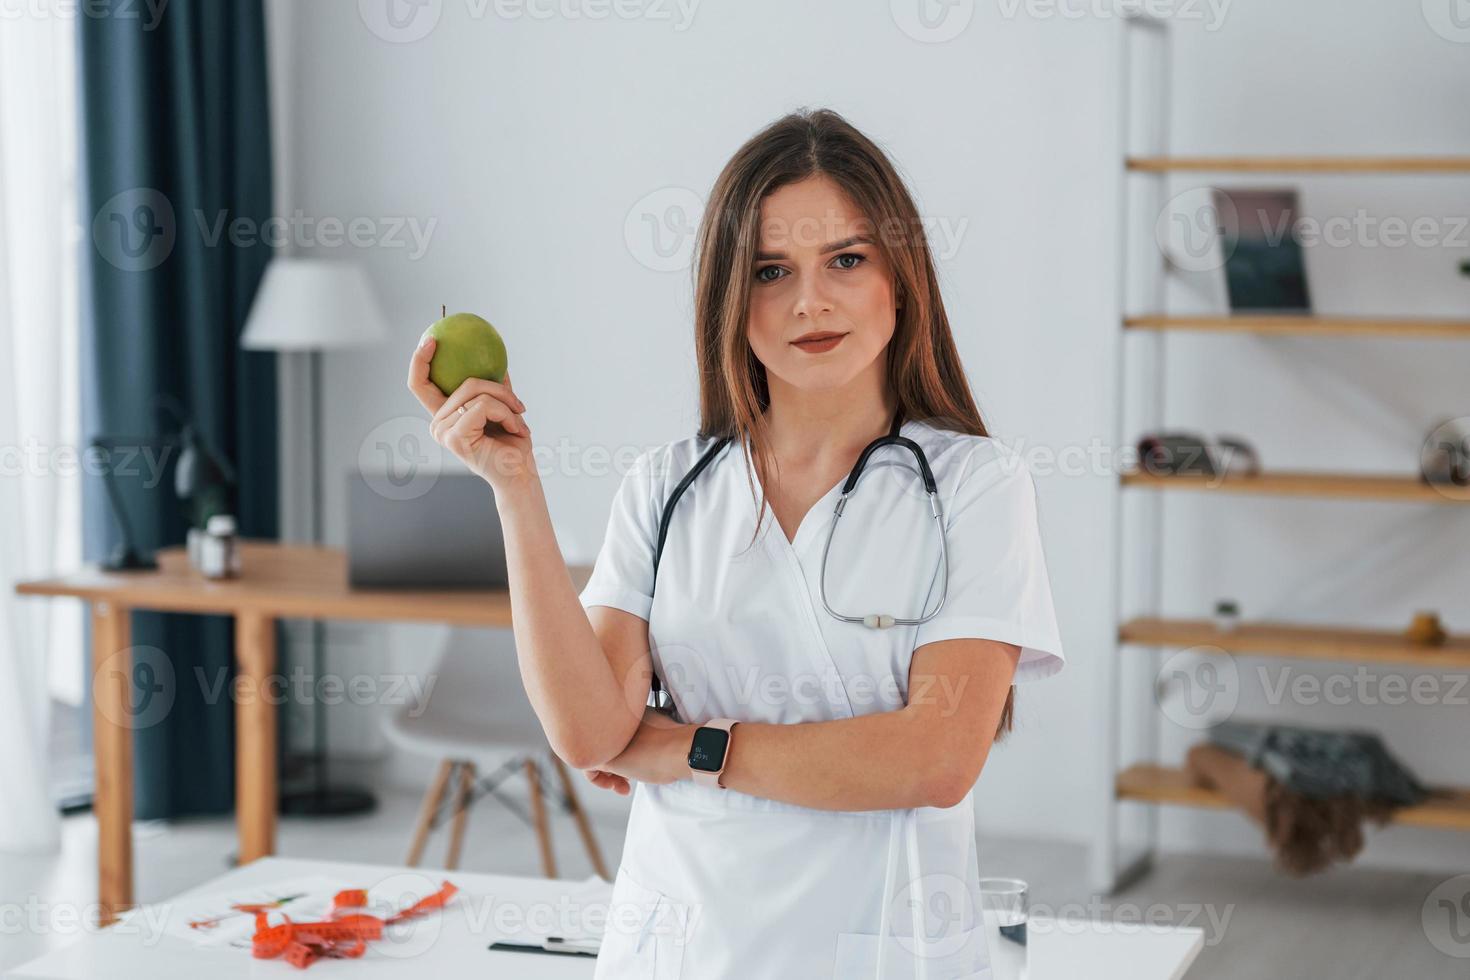 Woman holding an apple. Professional medical worker in white coat is in the office photo